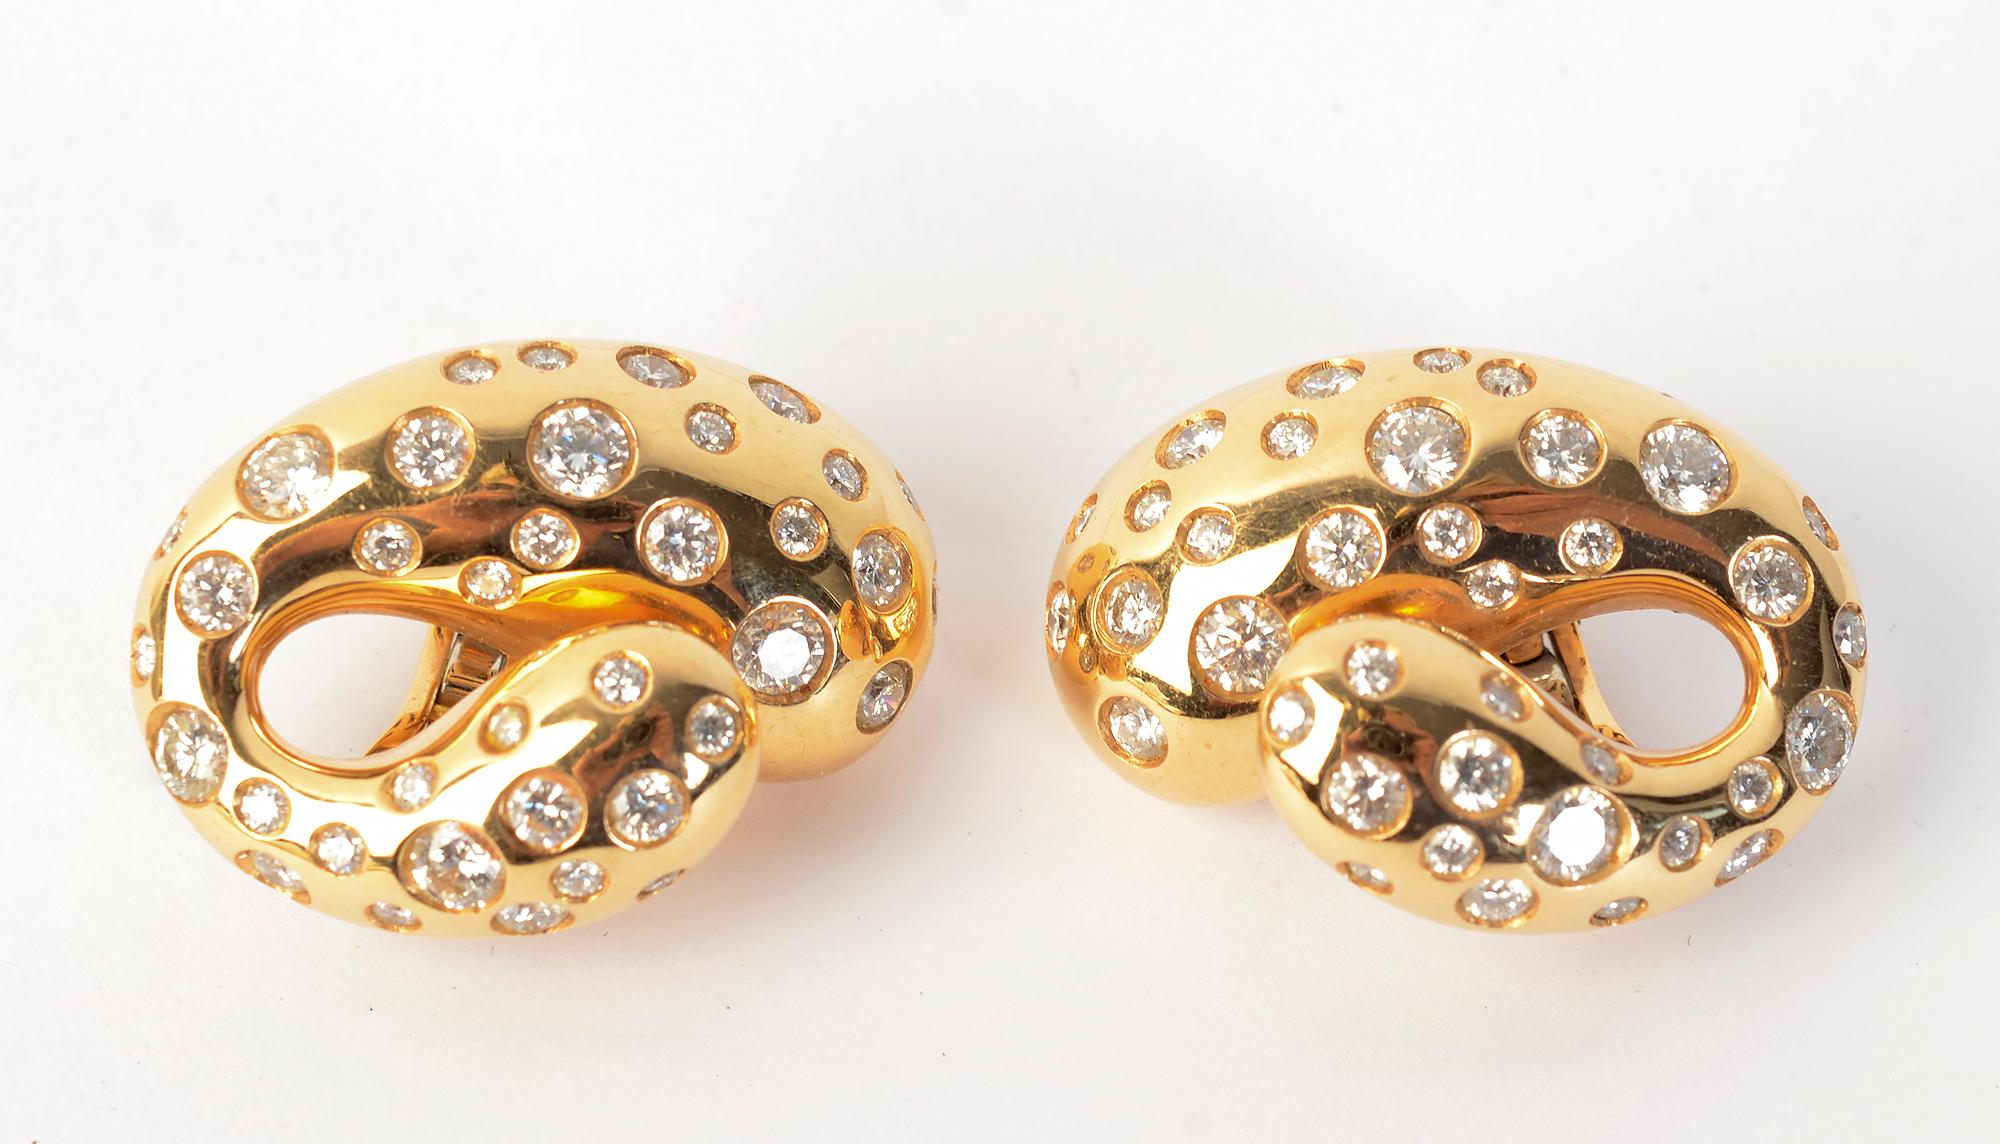 Powerful and elegant gold and diamond earrings by de Grisogono. The crescent shaped earrings have 75 round brilliant cut  diamonds in a variety of sizes. The total weight is approximately 1.5 carats. 
Backs are clips with collapsible posts.
